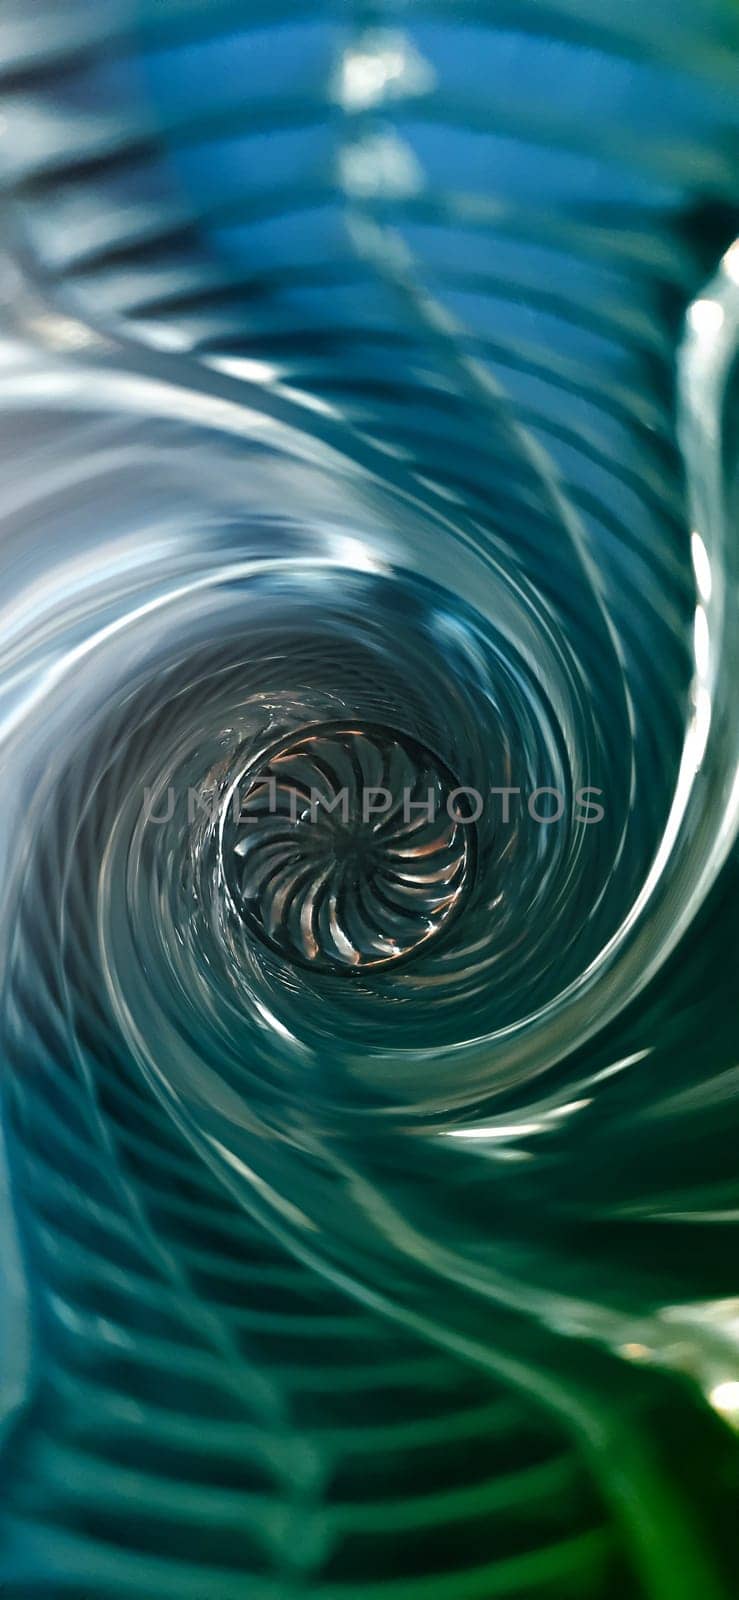 Creative background image. Spiral funnel with an ornament in the center.